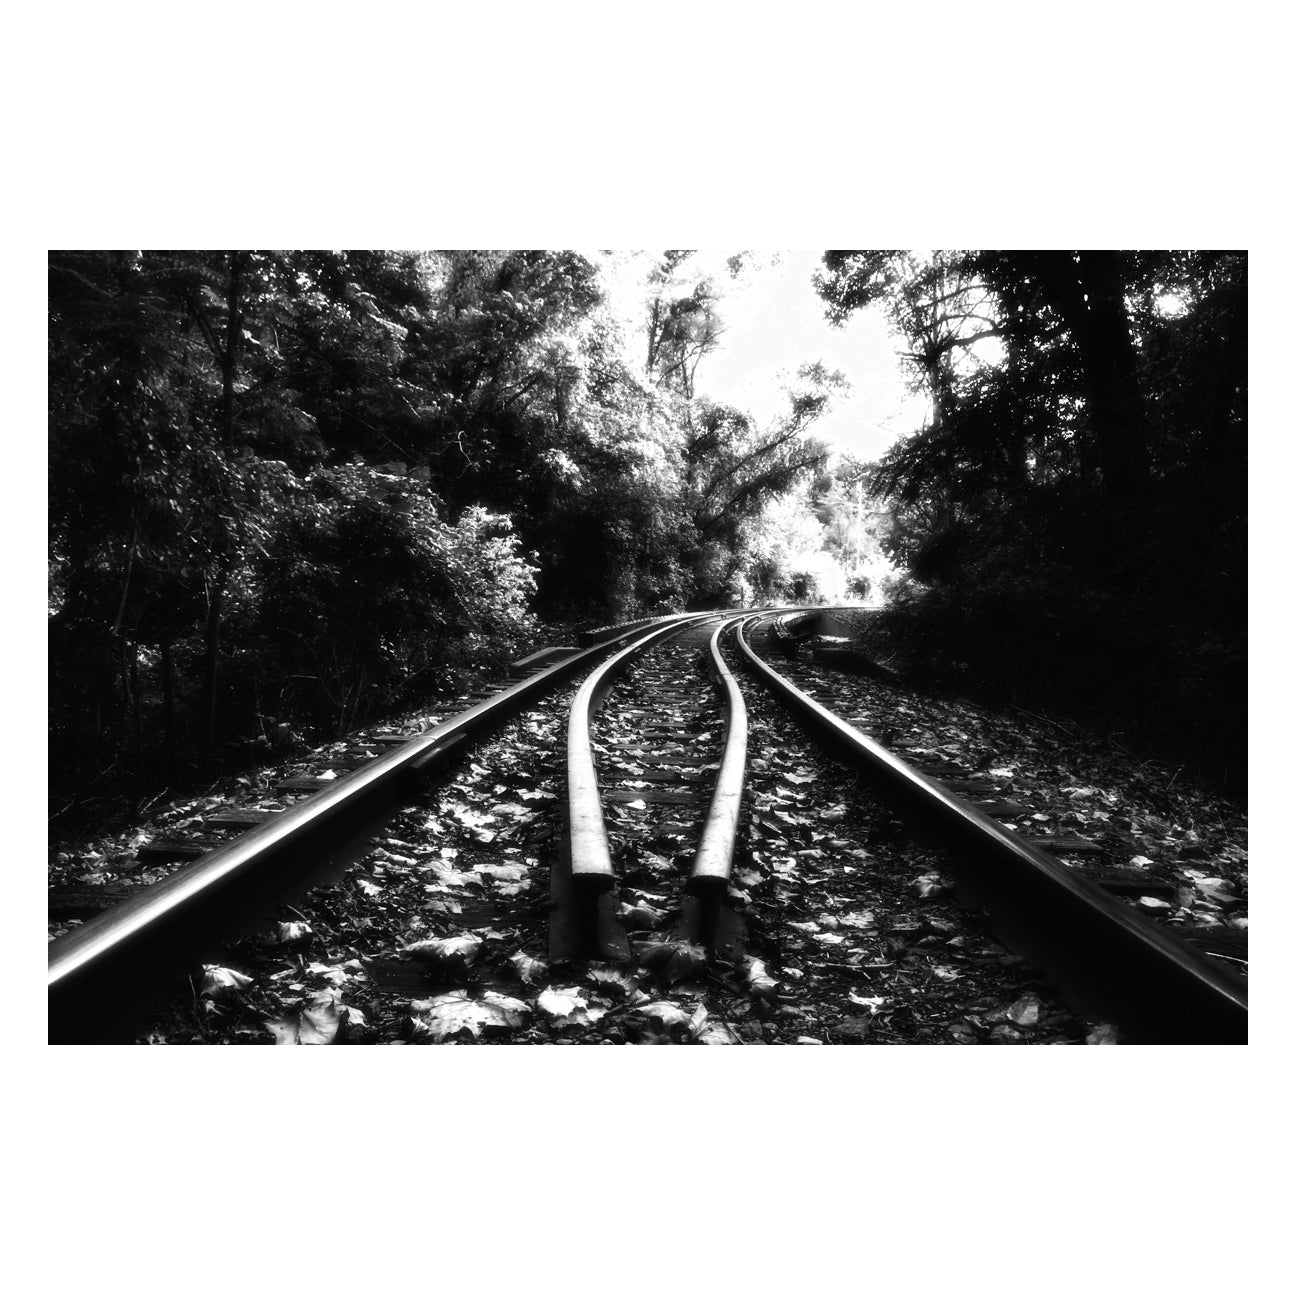 Lead Me Into The Light in Black and White Rural Landscape Fine Art Canvas Wall Art Prints  - PIPAFINEART